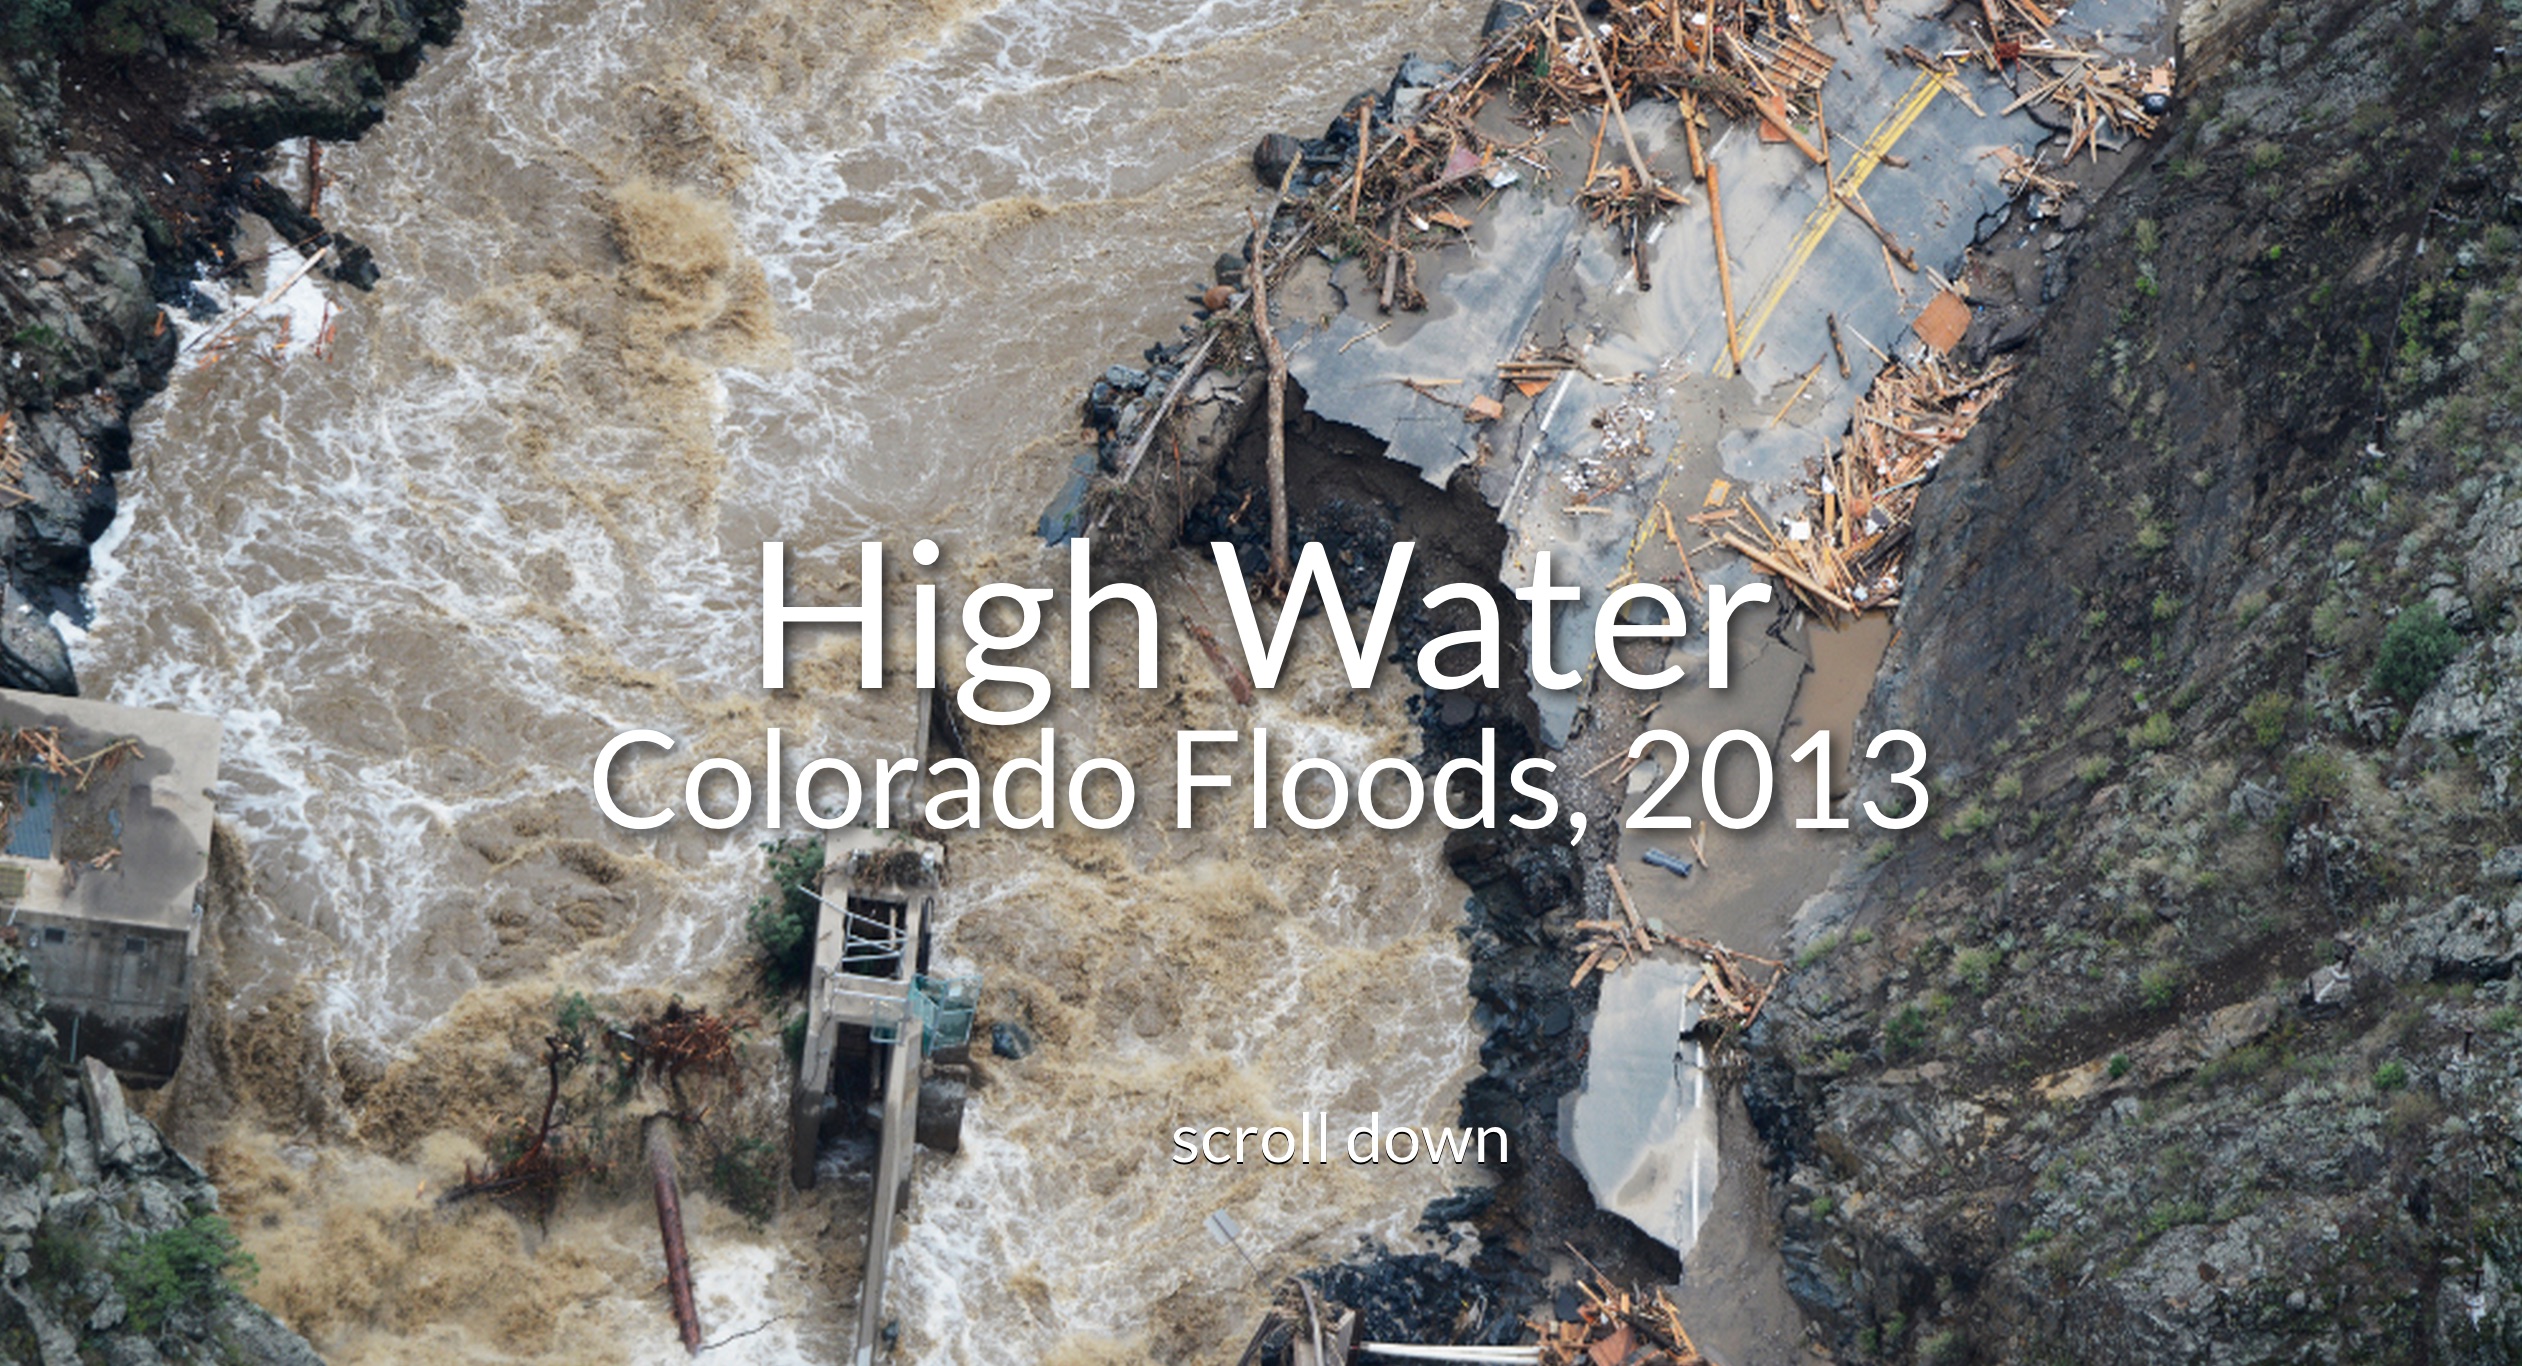 High Water | A story of Colorado's historic flooding in September 2013